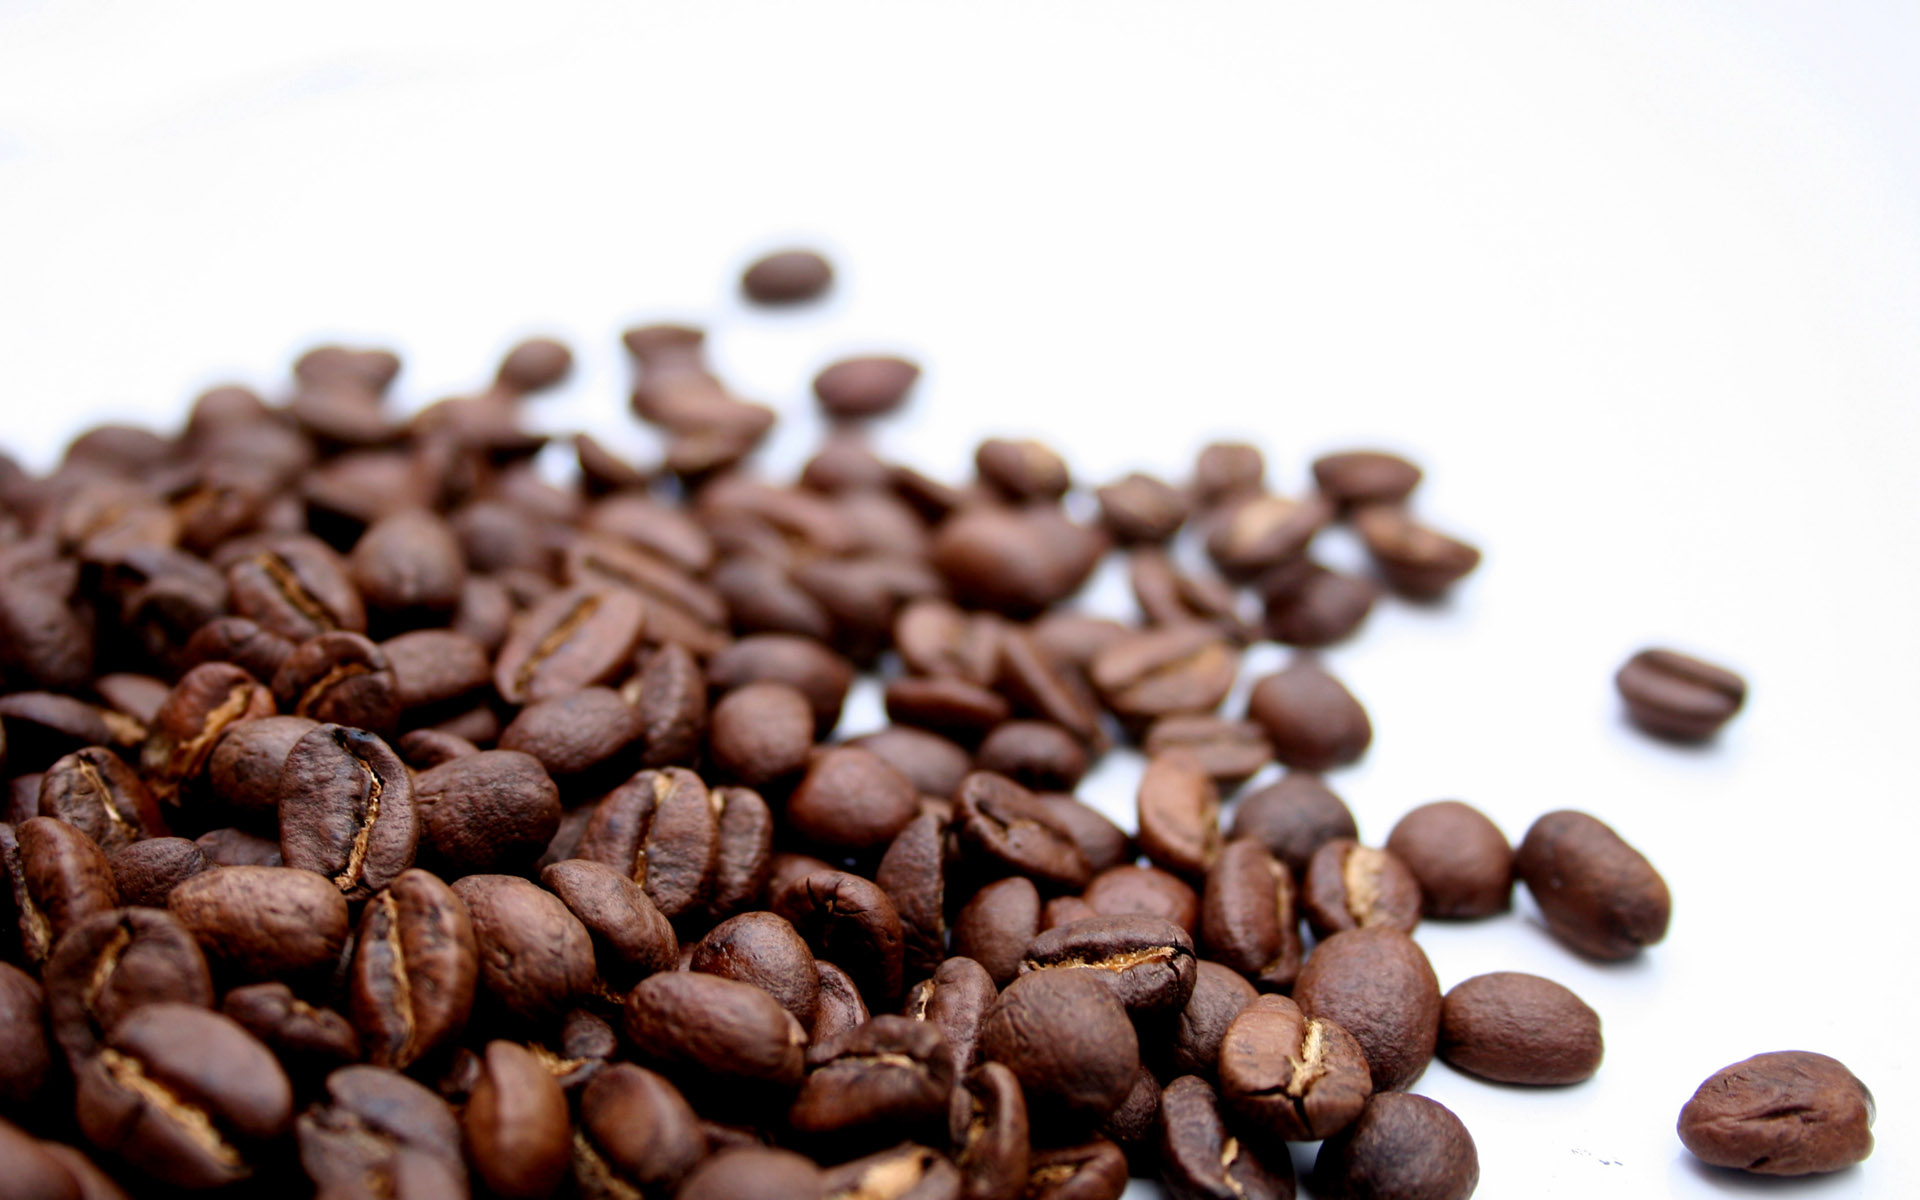 Coffee Beans 1920x1200 WIDE Image Photography